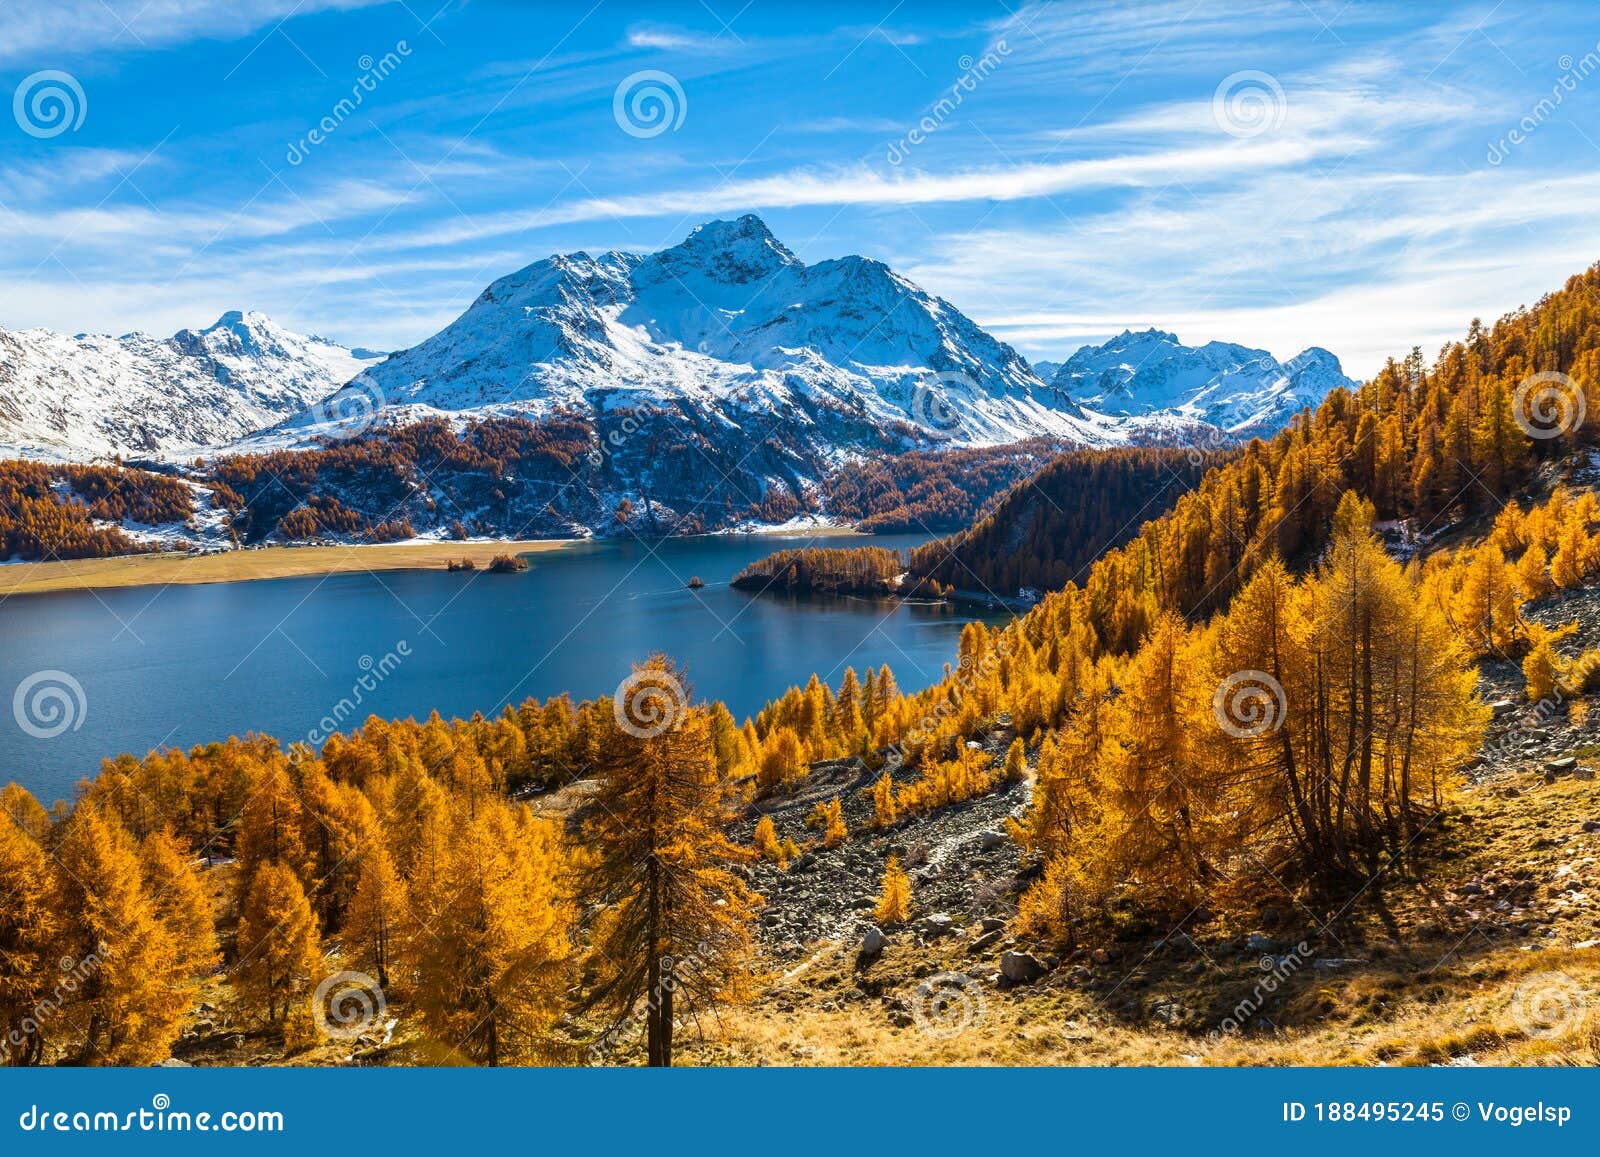 stunning view of sils lake and piz da la margna in golden autumn